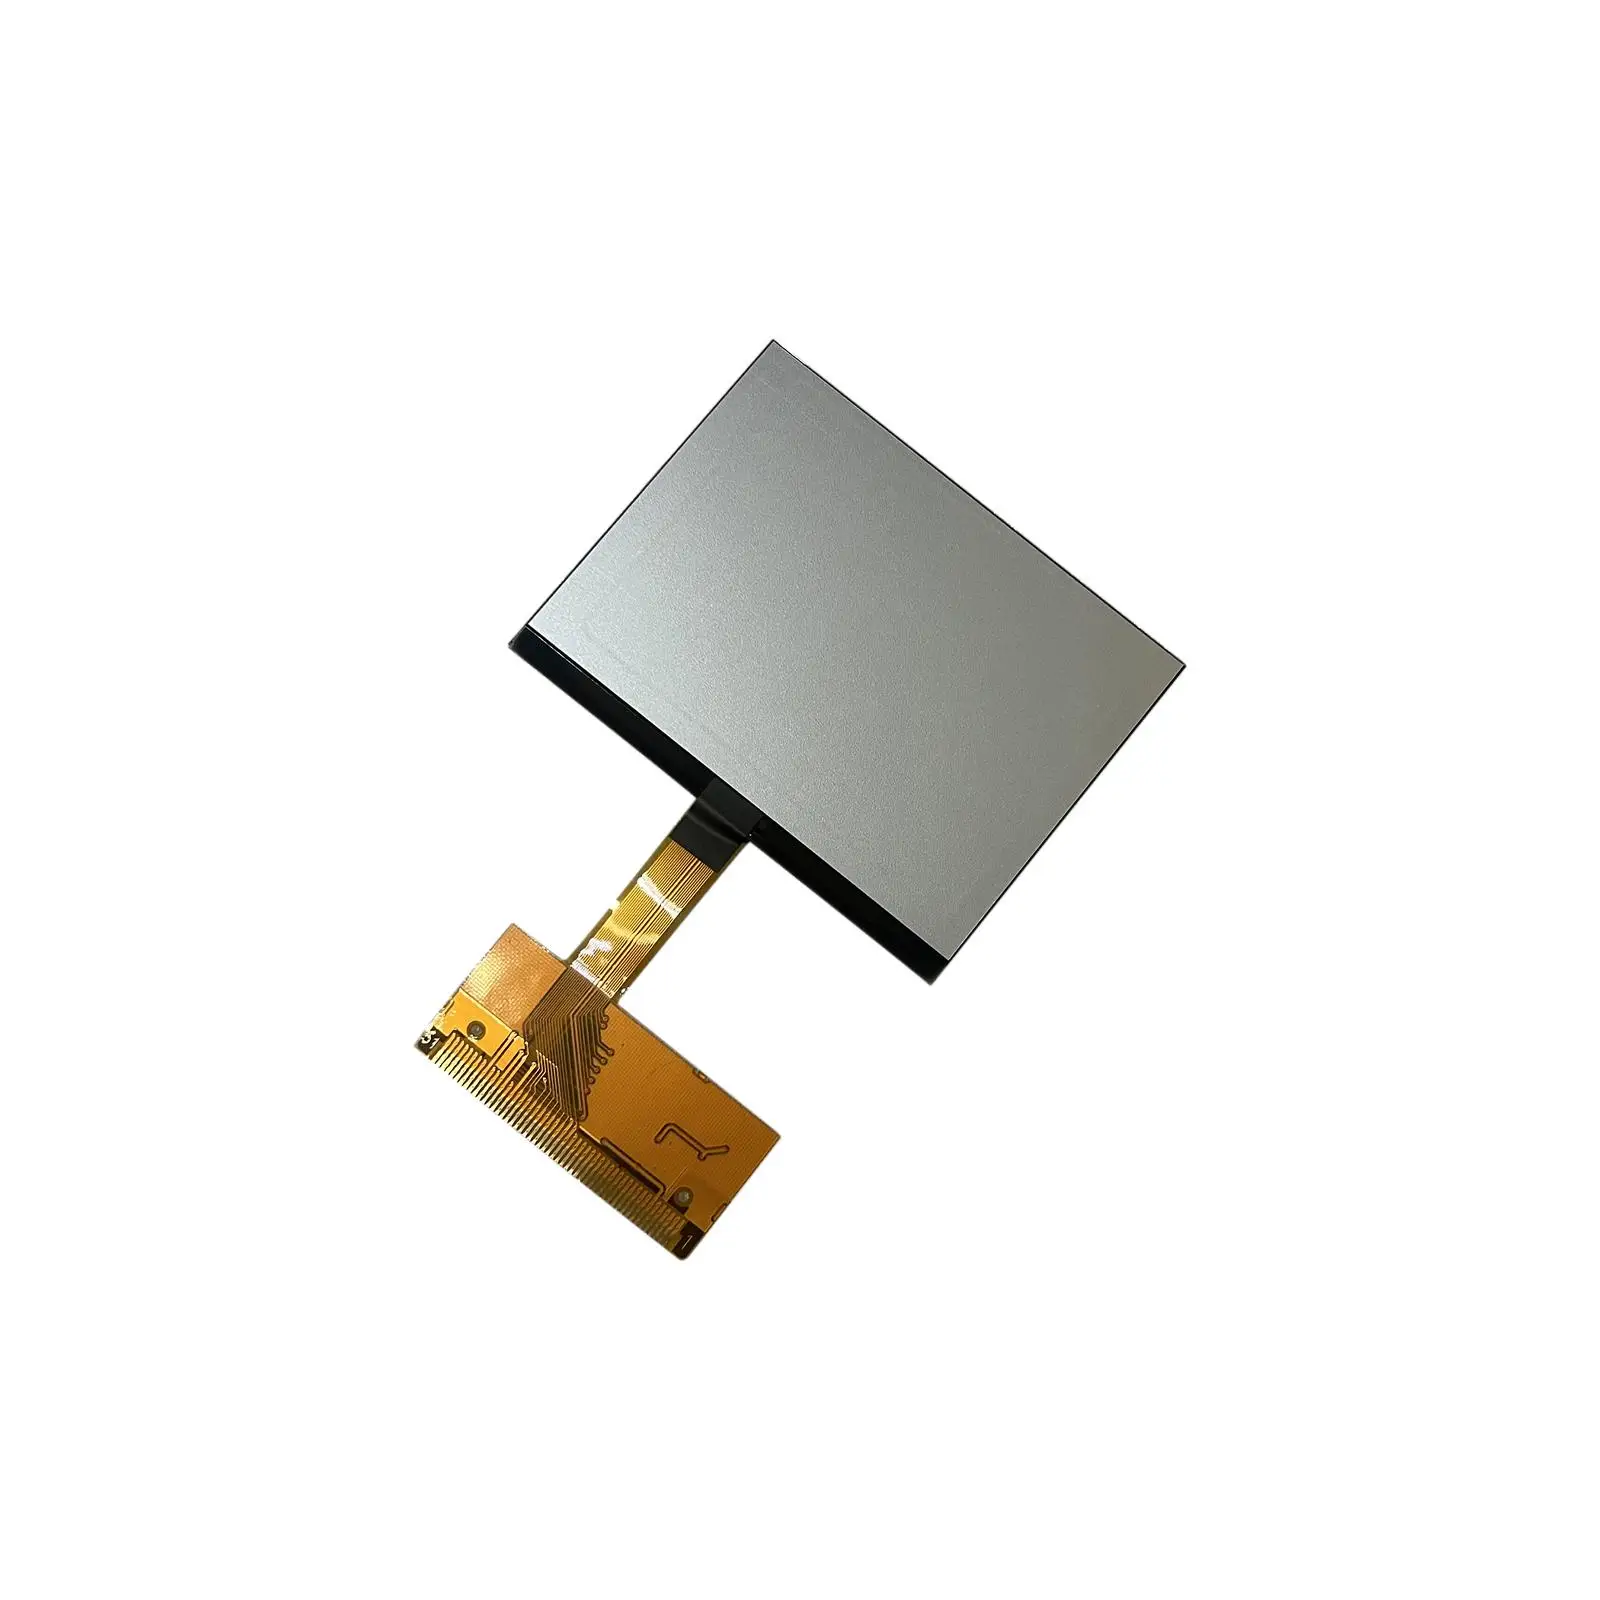 LCD Display Replacement Vehicle Spare Parts for Audi A3 A4 7.5cmx6cm